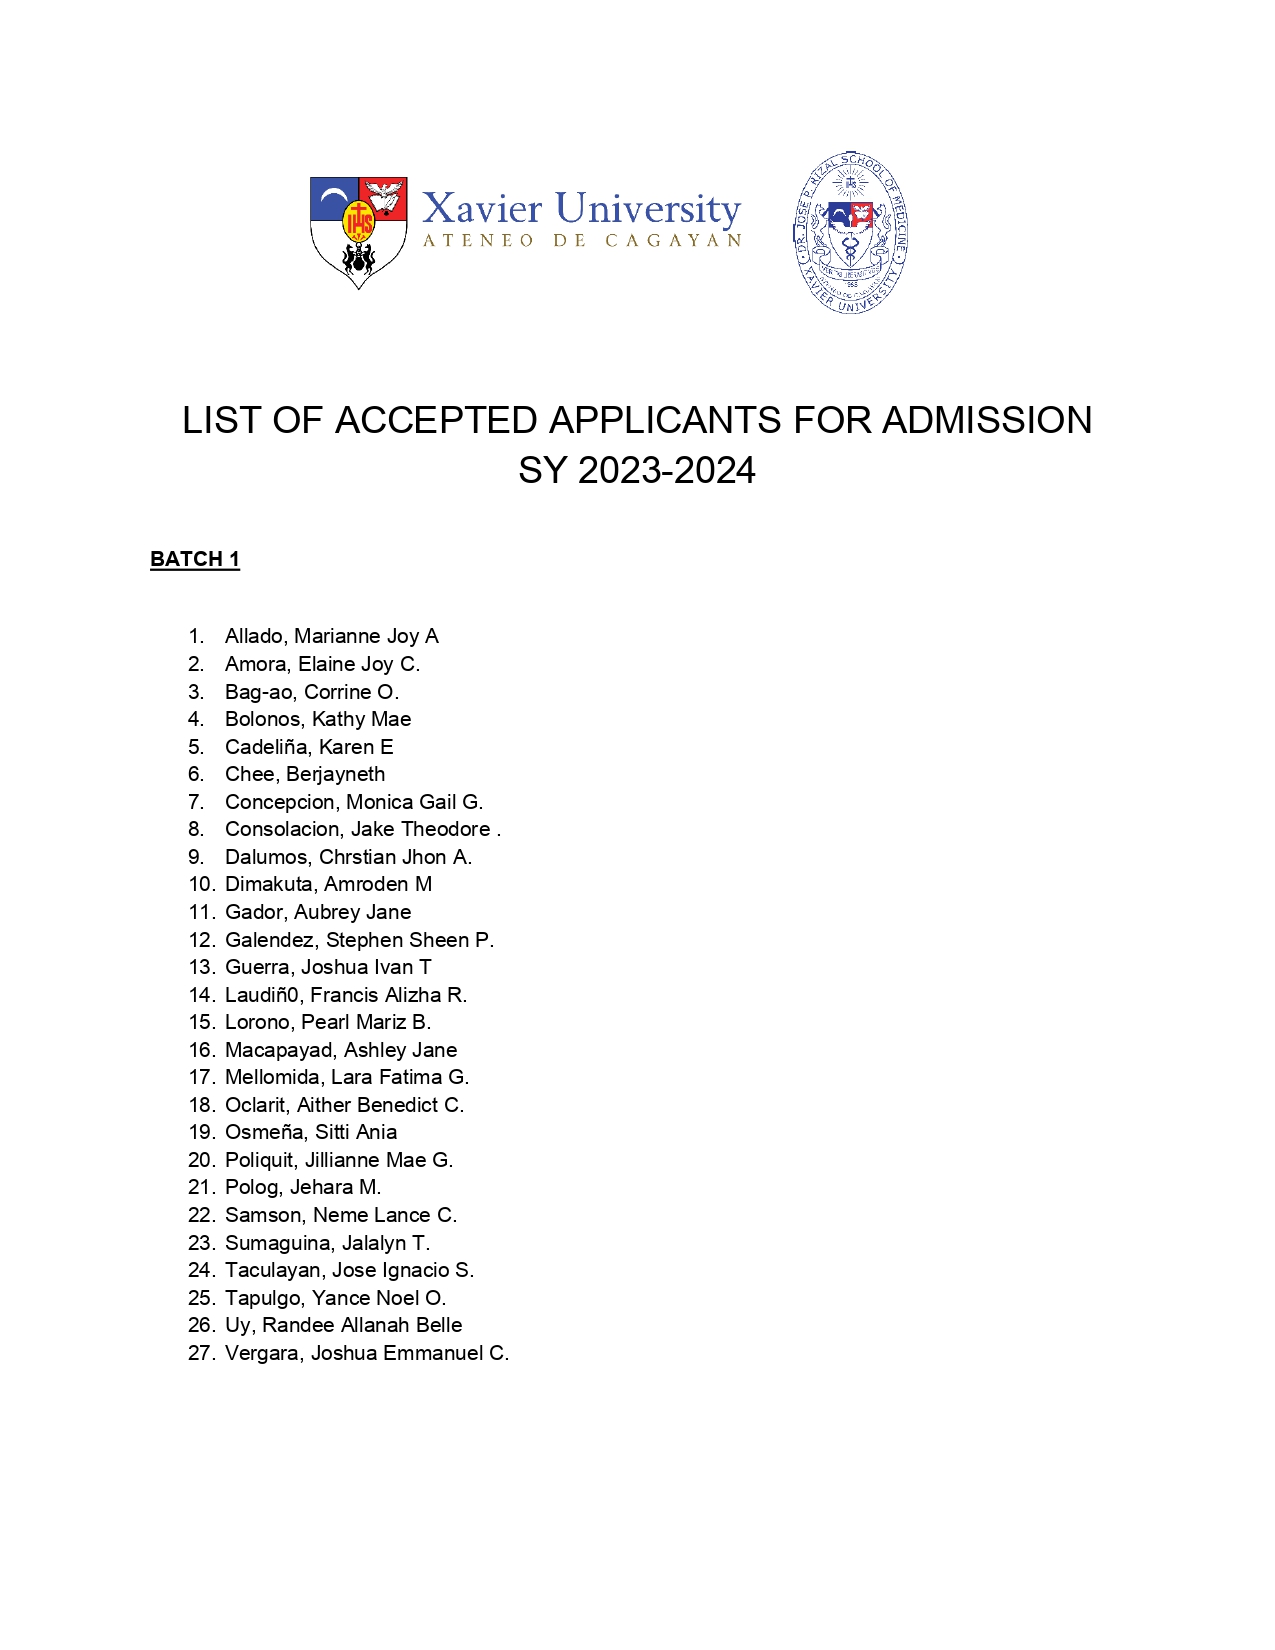 LIST OF ACCEPTED APPLICANTS FOR ADMISSION Revised page 0001